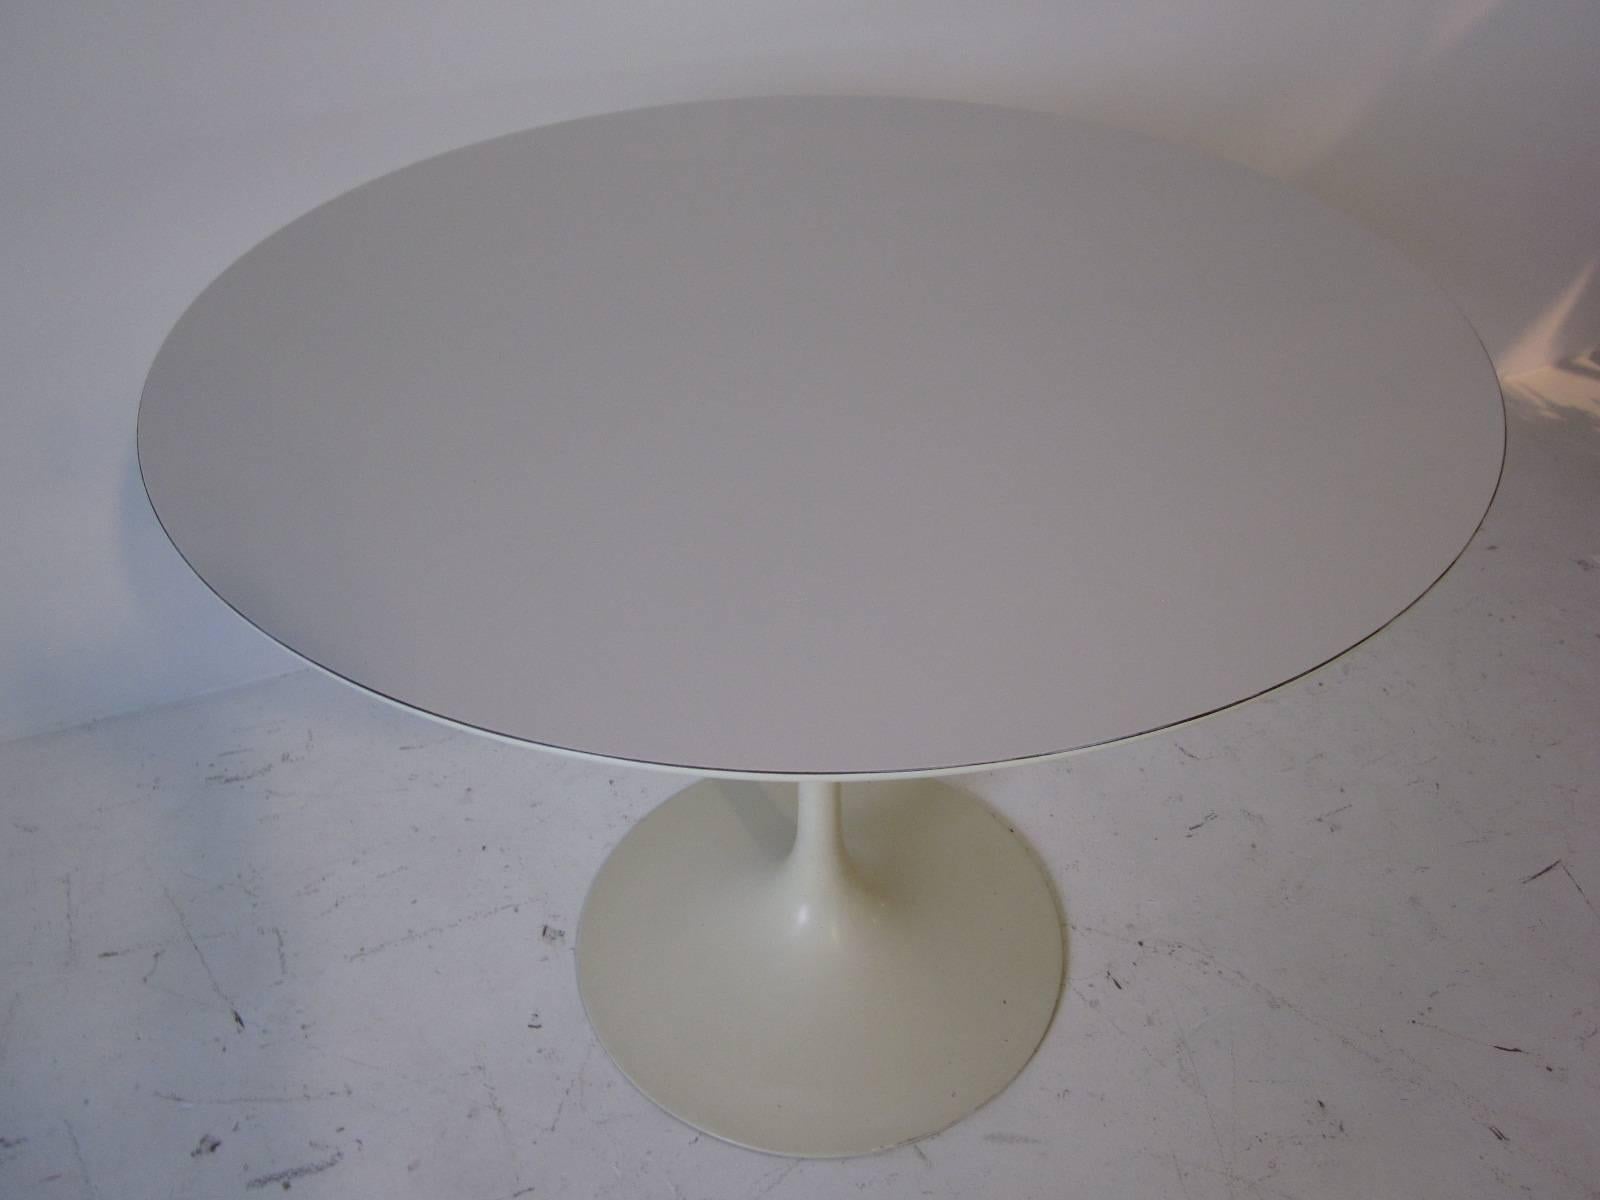 A smaller sized dining or cafe tulip table with white laminate top and cast metal leg manufactured by Knoll.